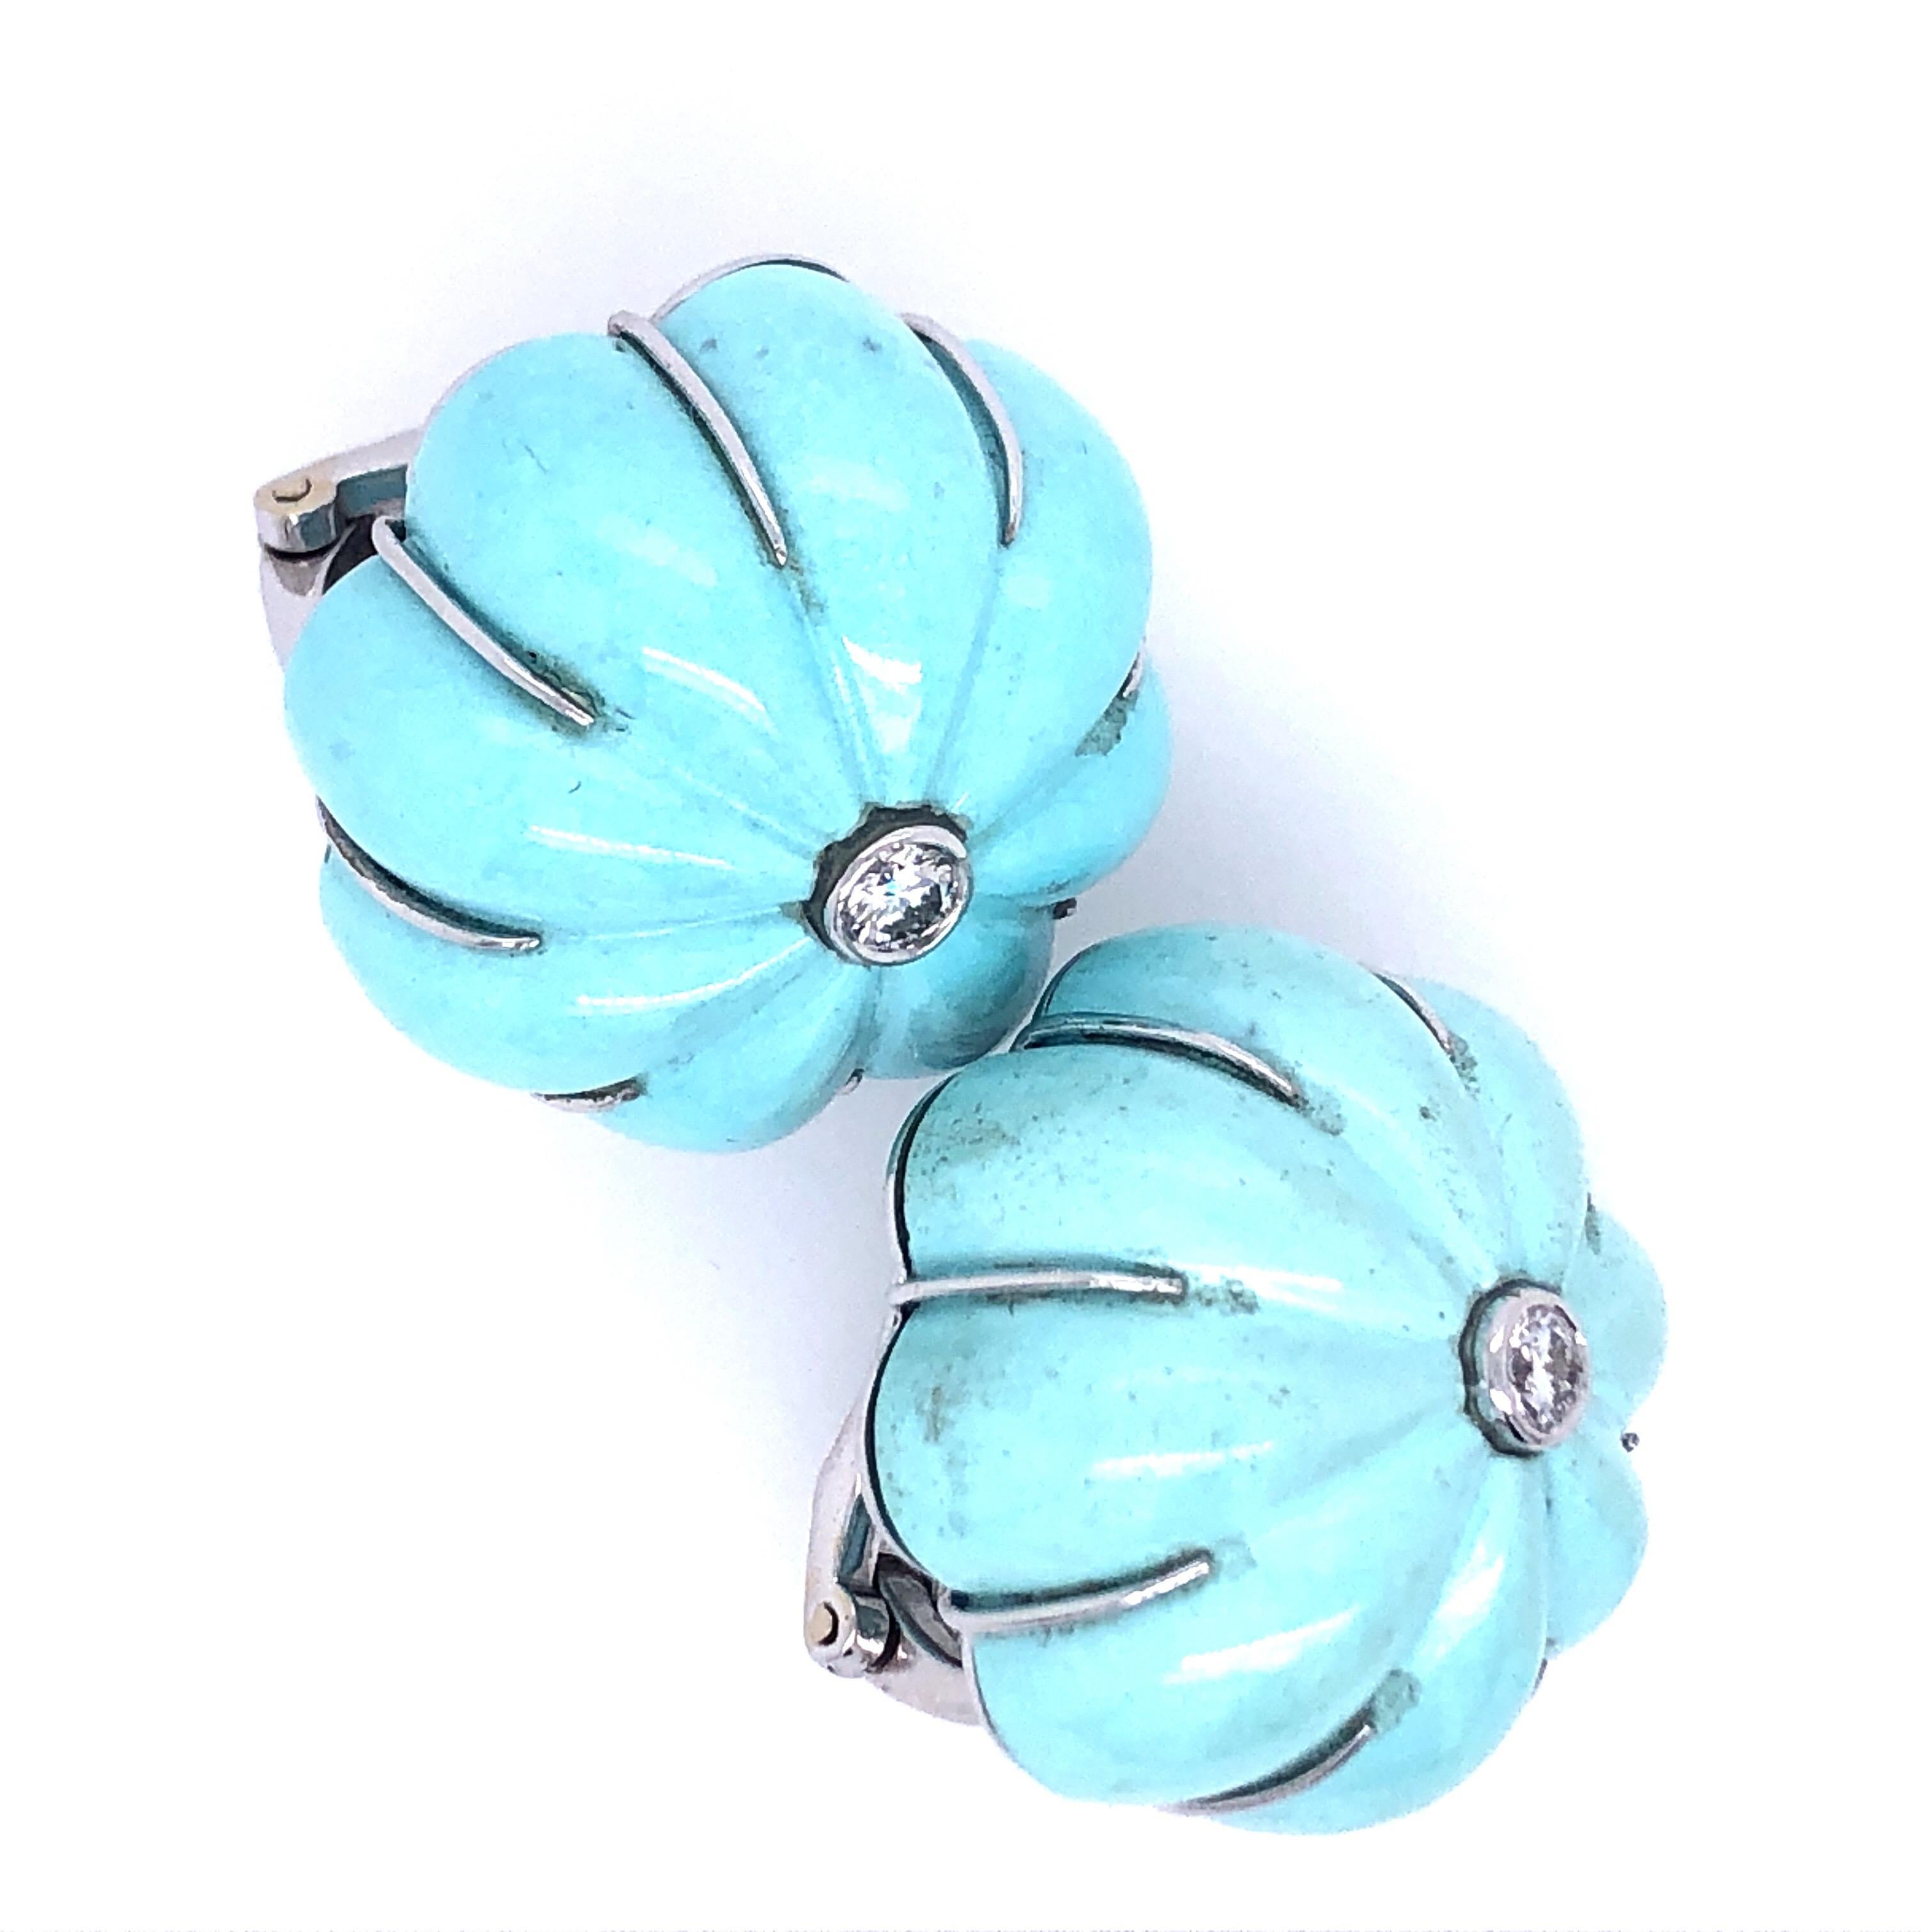 Fred Leighton 18K White Gold and Carved Turquoise Earrings.  Stamped 750 and 18K and Fred Leighton.  Clip on earrings.  